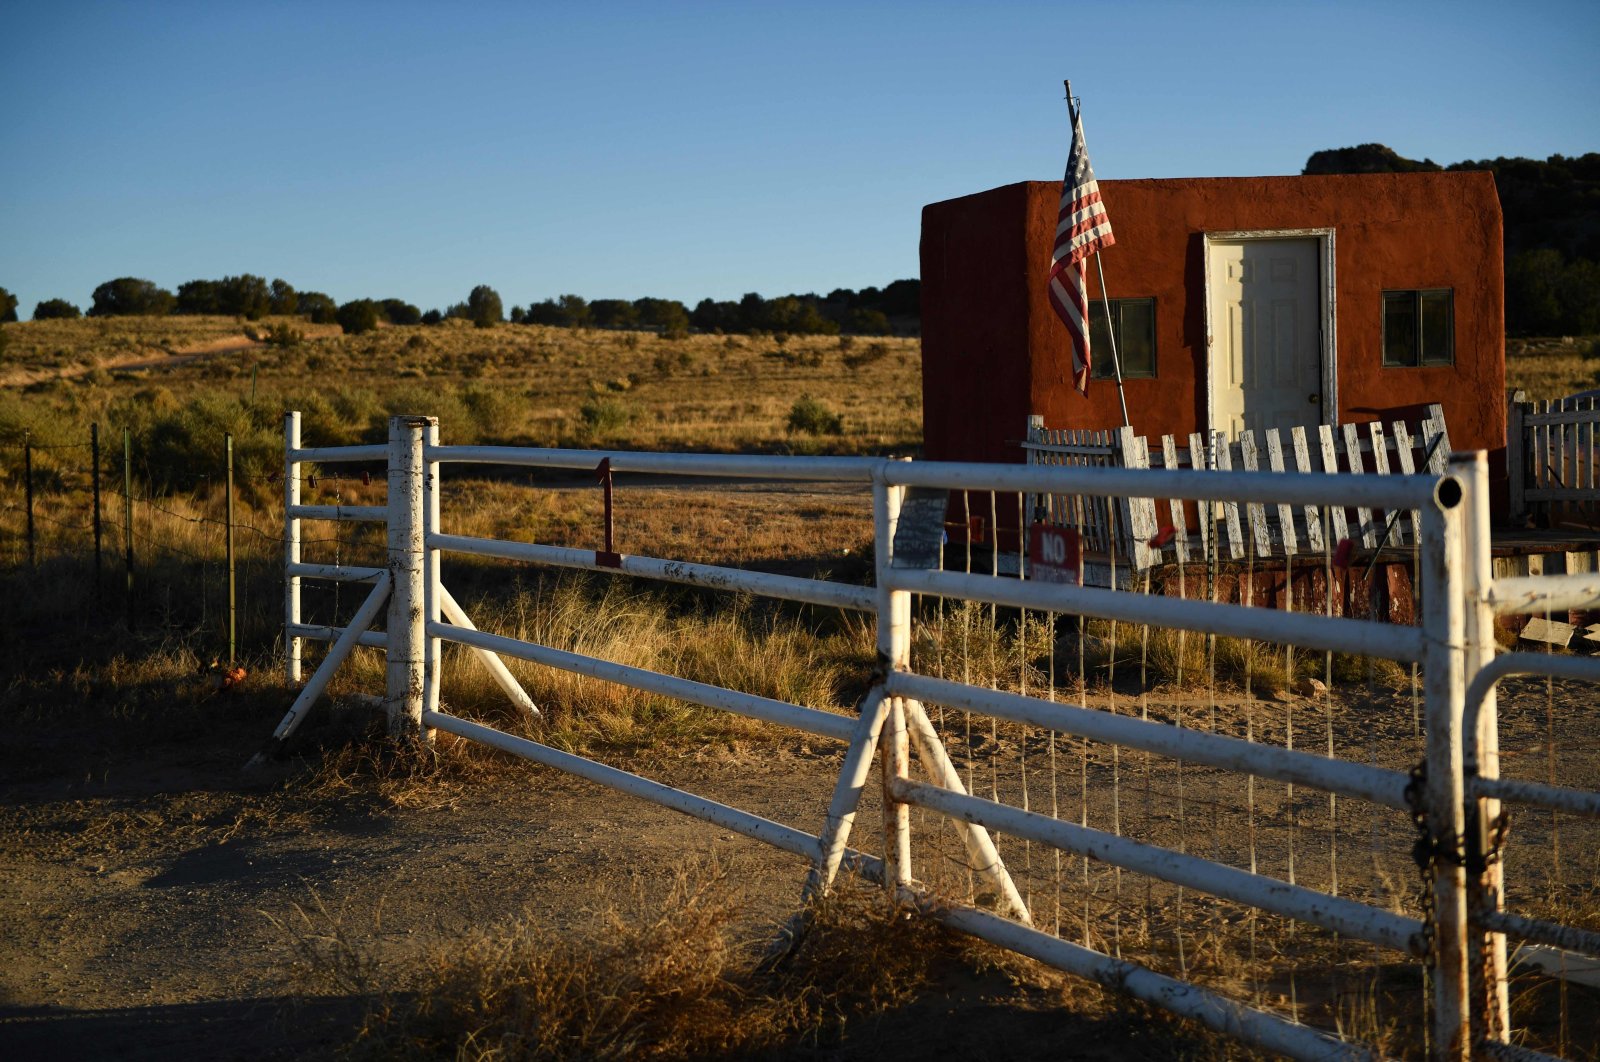 The entrance to the Bonanza Creek Ranch where the film "Rust" was filming in Santa Fe, New Mexico, Oct. 29, 2021. (AFP Photo)